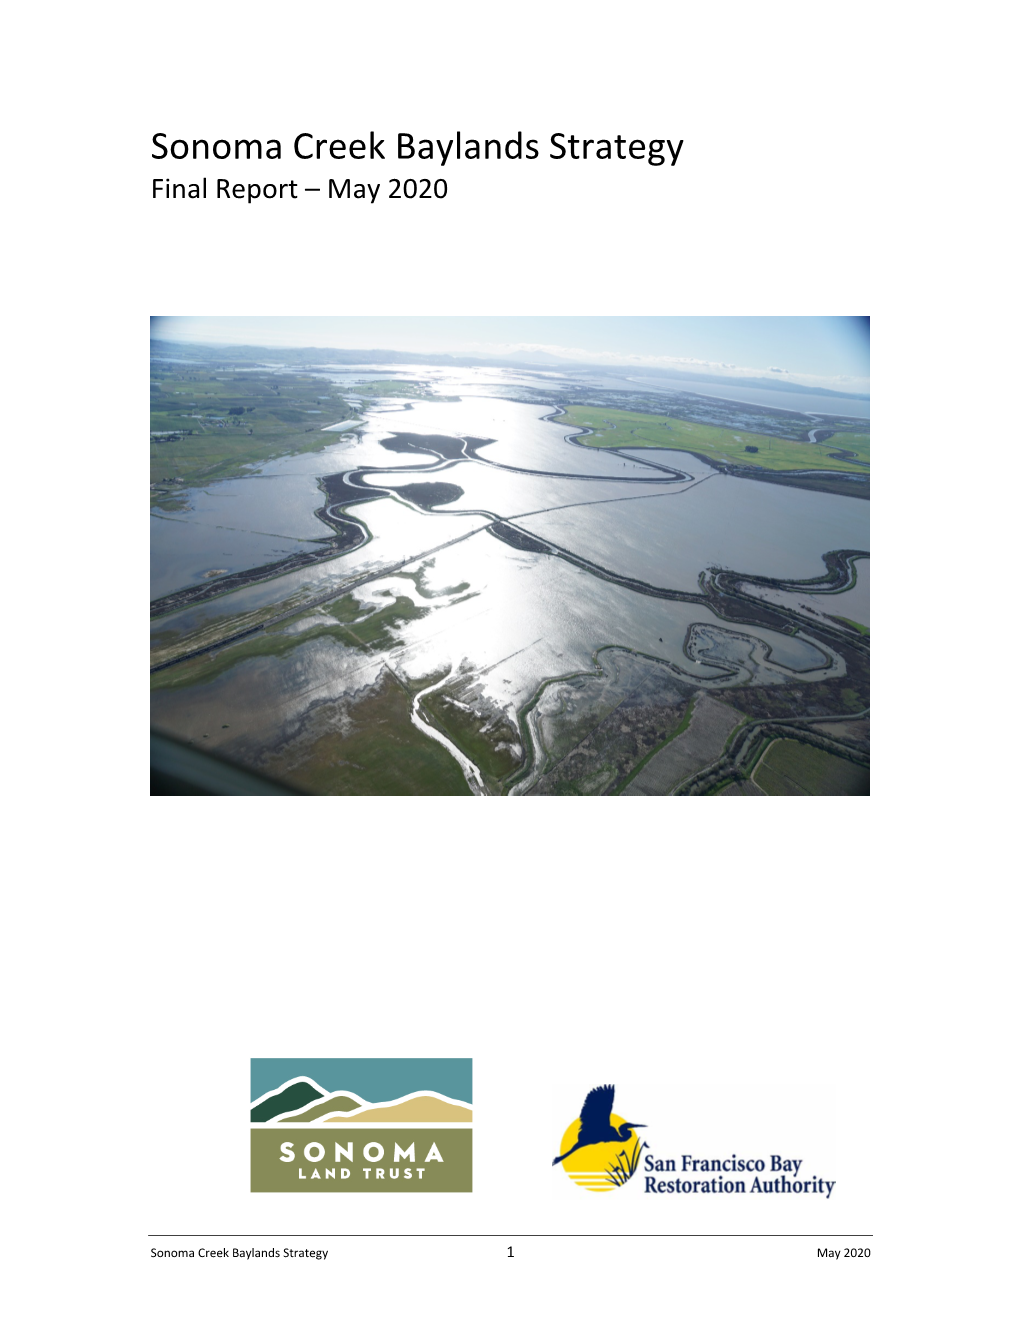 Sonoma Creek Baylands Strategy Final Report – May 2020